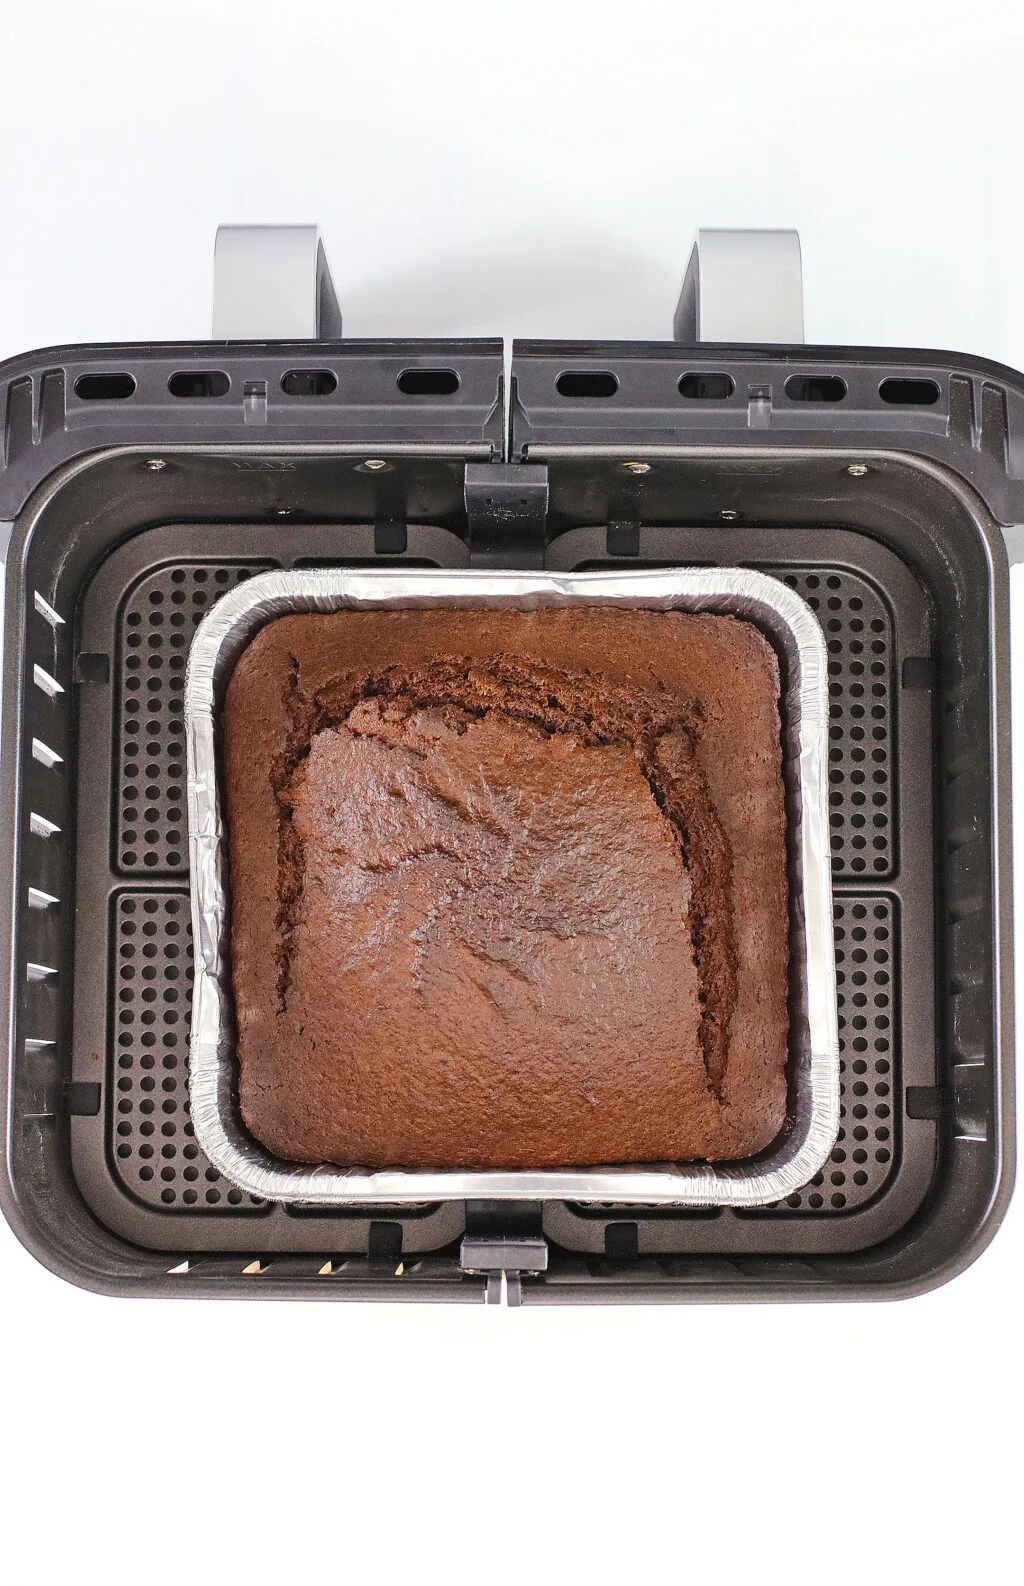 cooked chocolate cake in air fryer